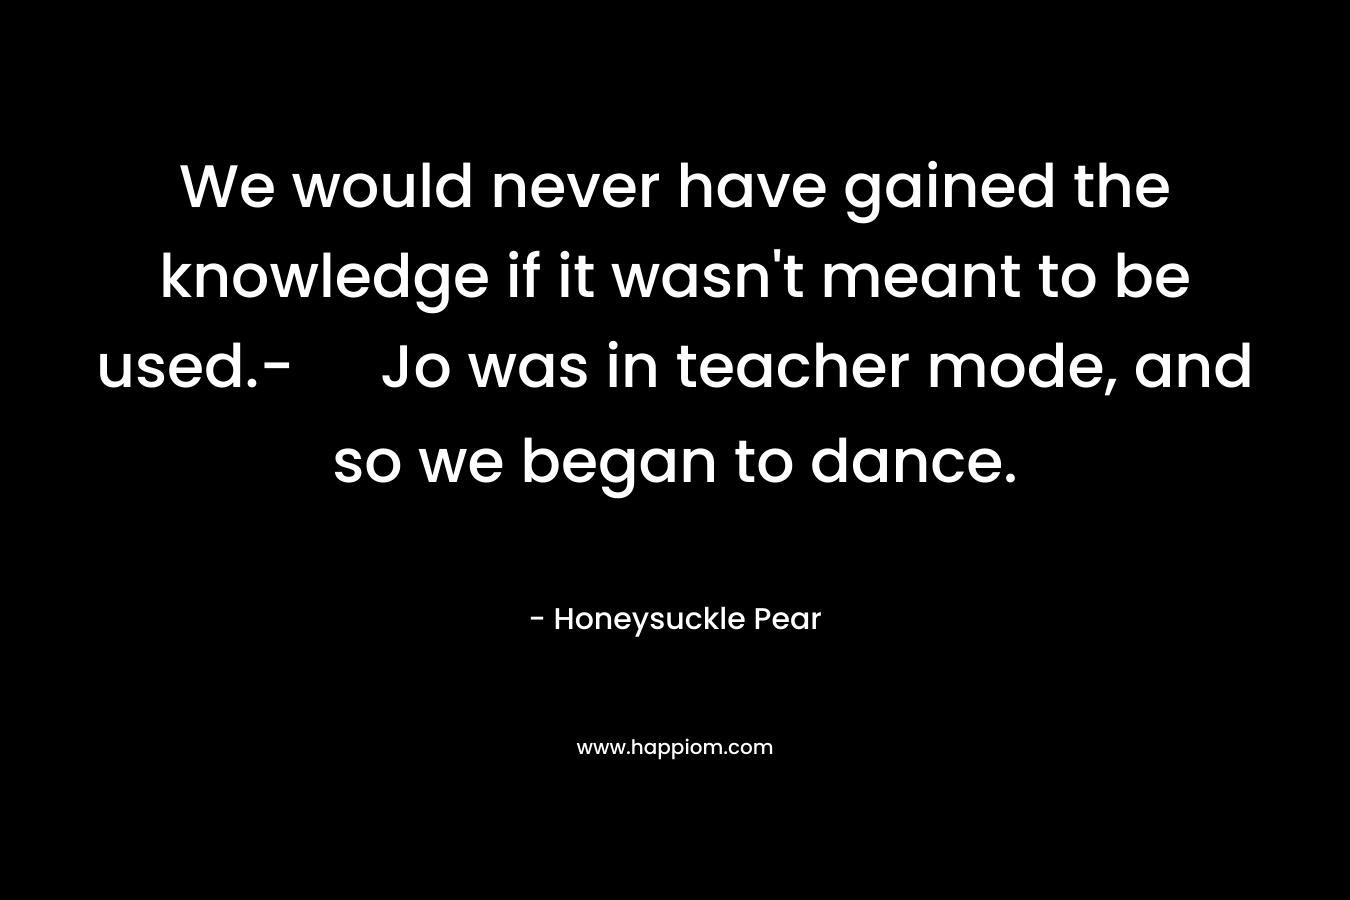 We would never have gained the knowledge if it wasn’t meant to be used.- Jo was in teacher mode, and so we began to dance. – Honeysuckle Pear